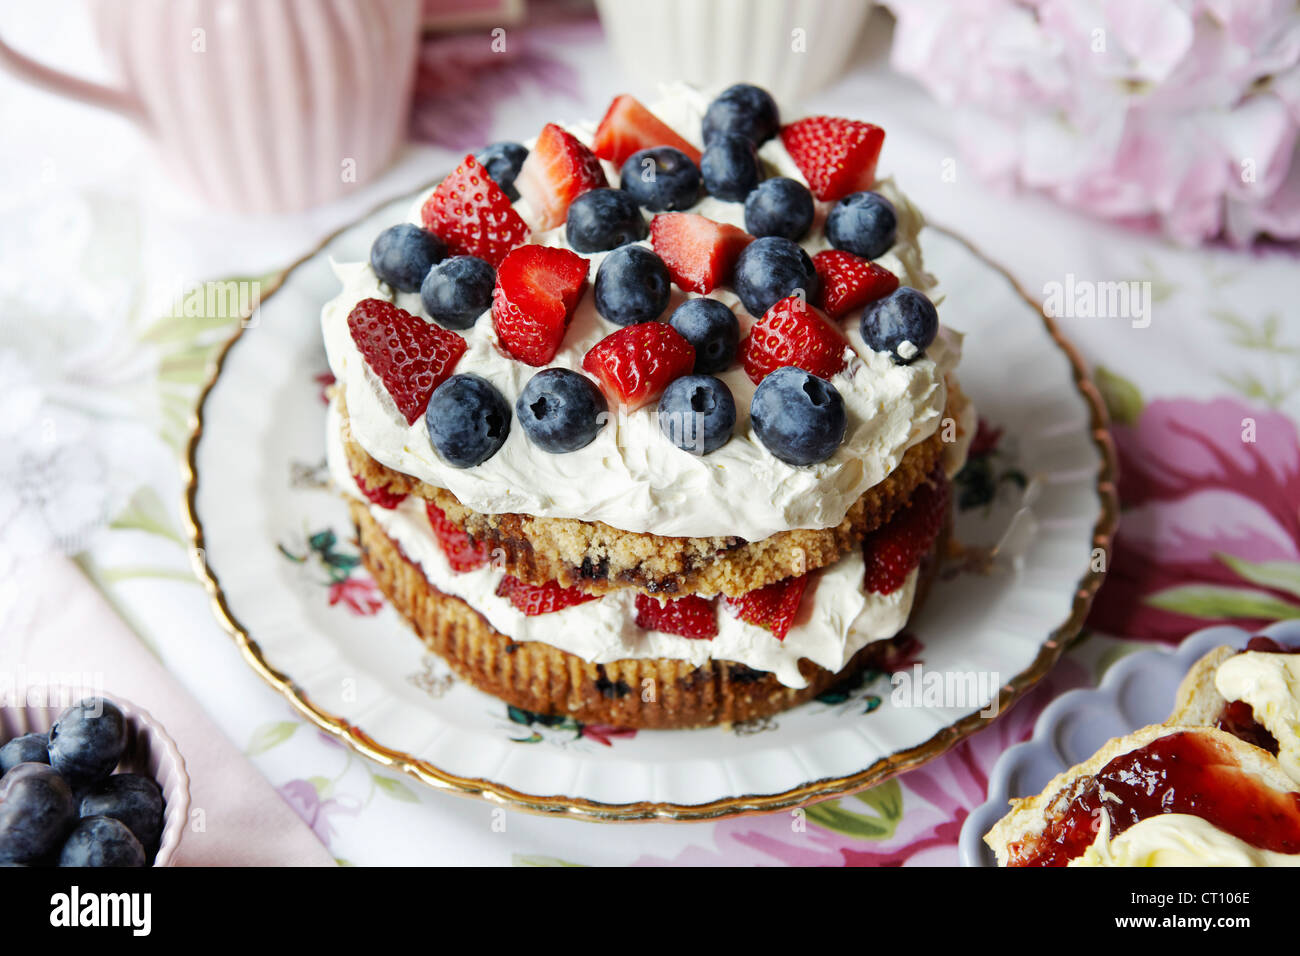 Plate of fruit and cream cake Stock Photo